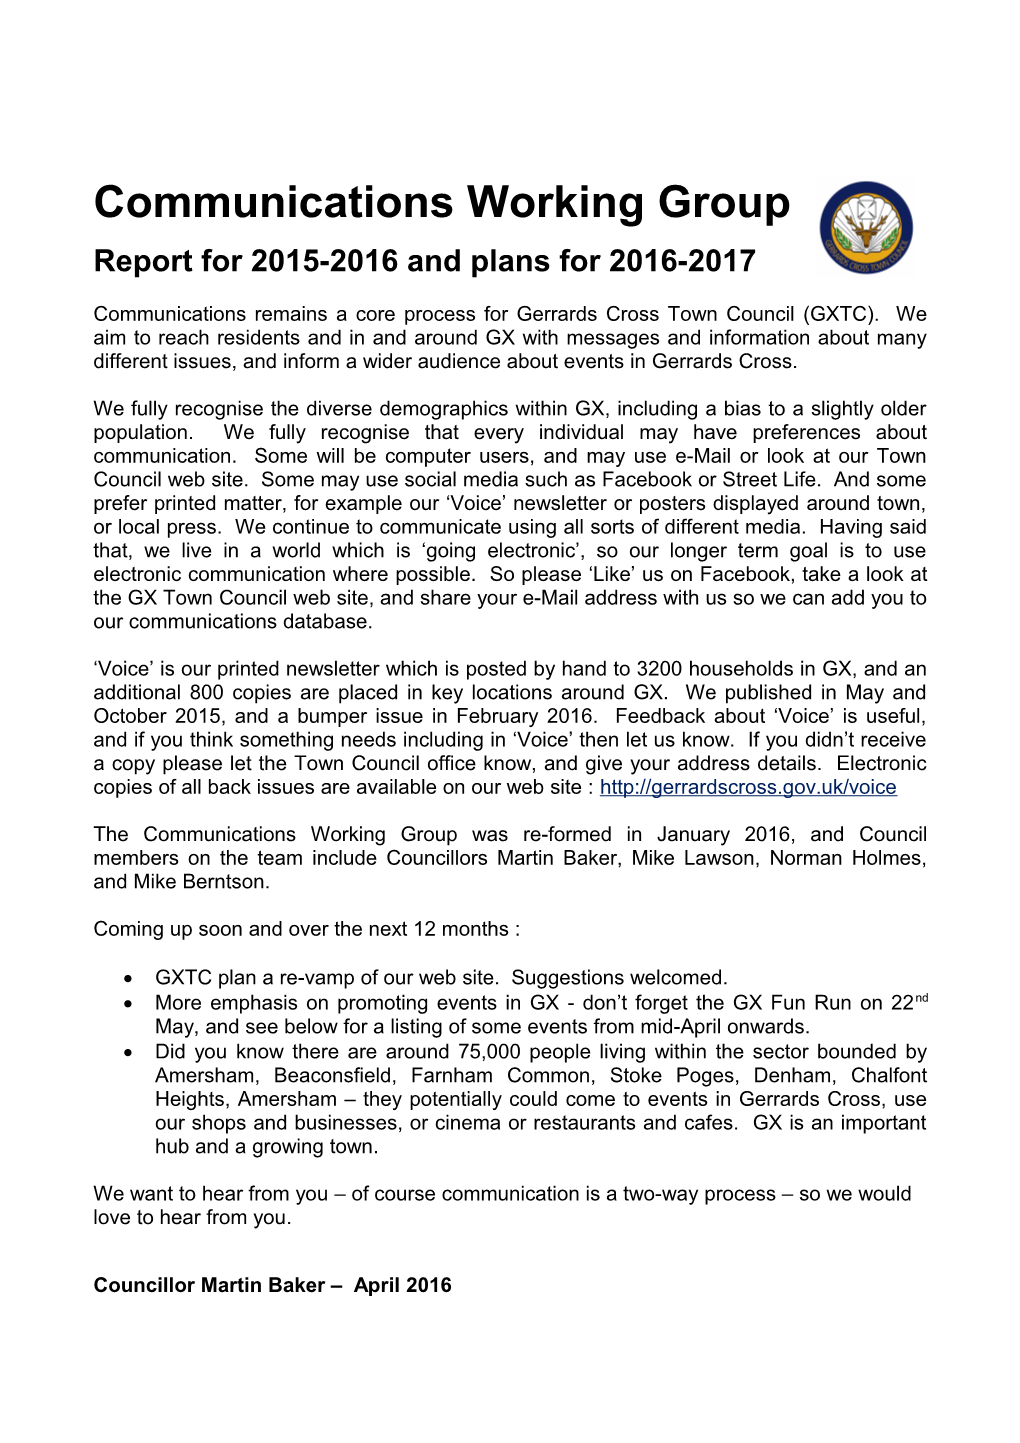 Report for 2015-2016 and Plans for 2016-2017